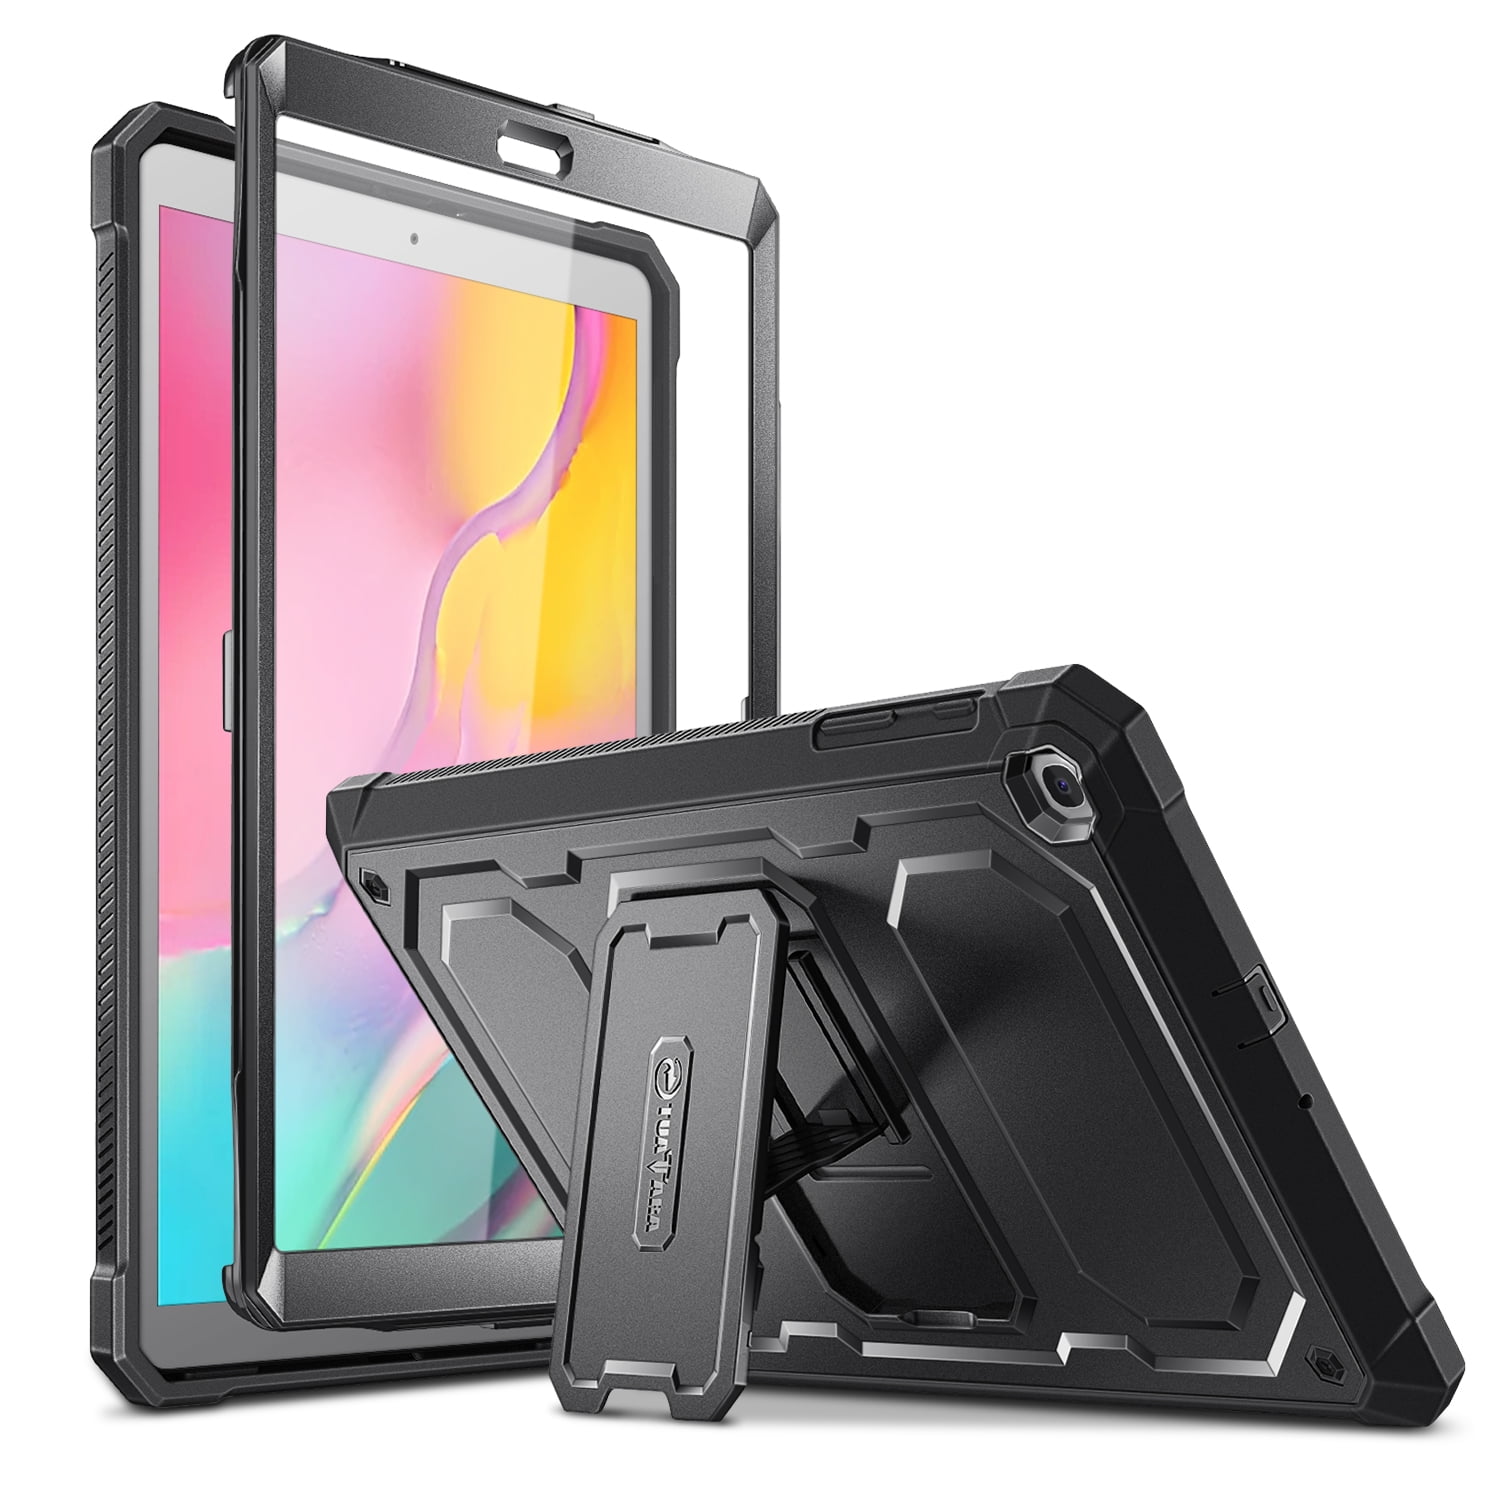 Tempered GLASS Screen Protector Case Skin for Samsung Galaxy Tab A/ E/ S/ Pro 